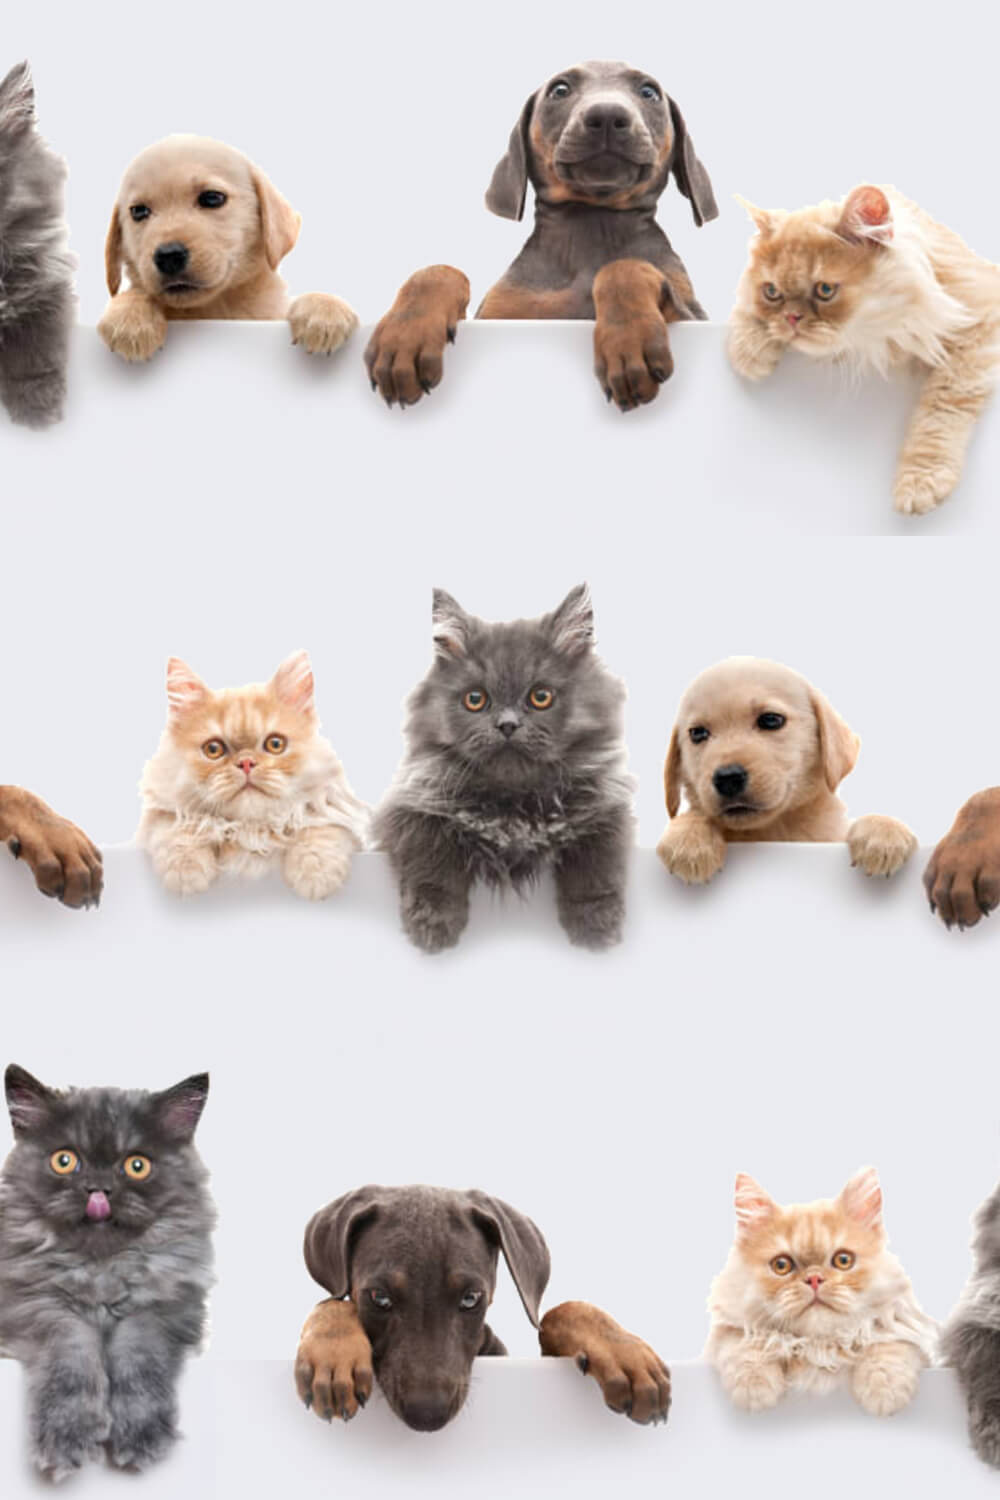 Small dogs and kittens look into the lens and hold onto the barrier with their paws.